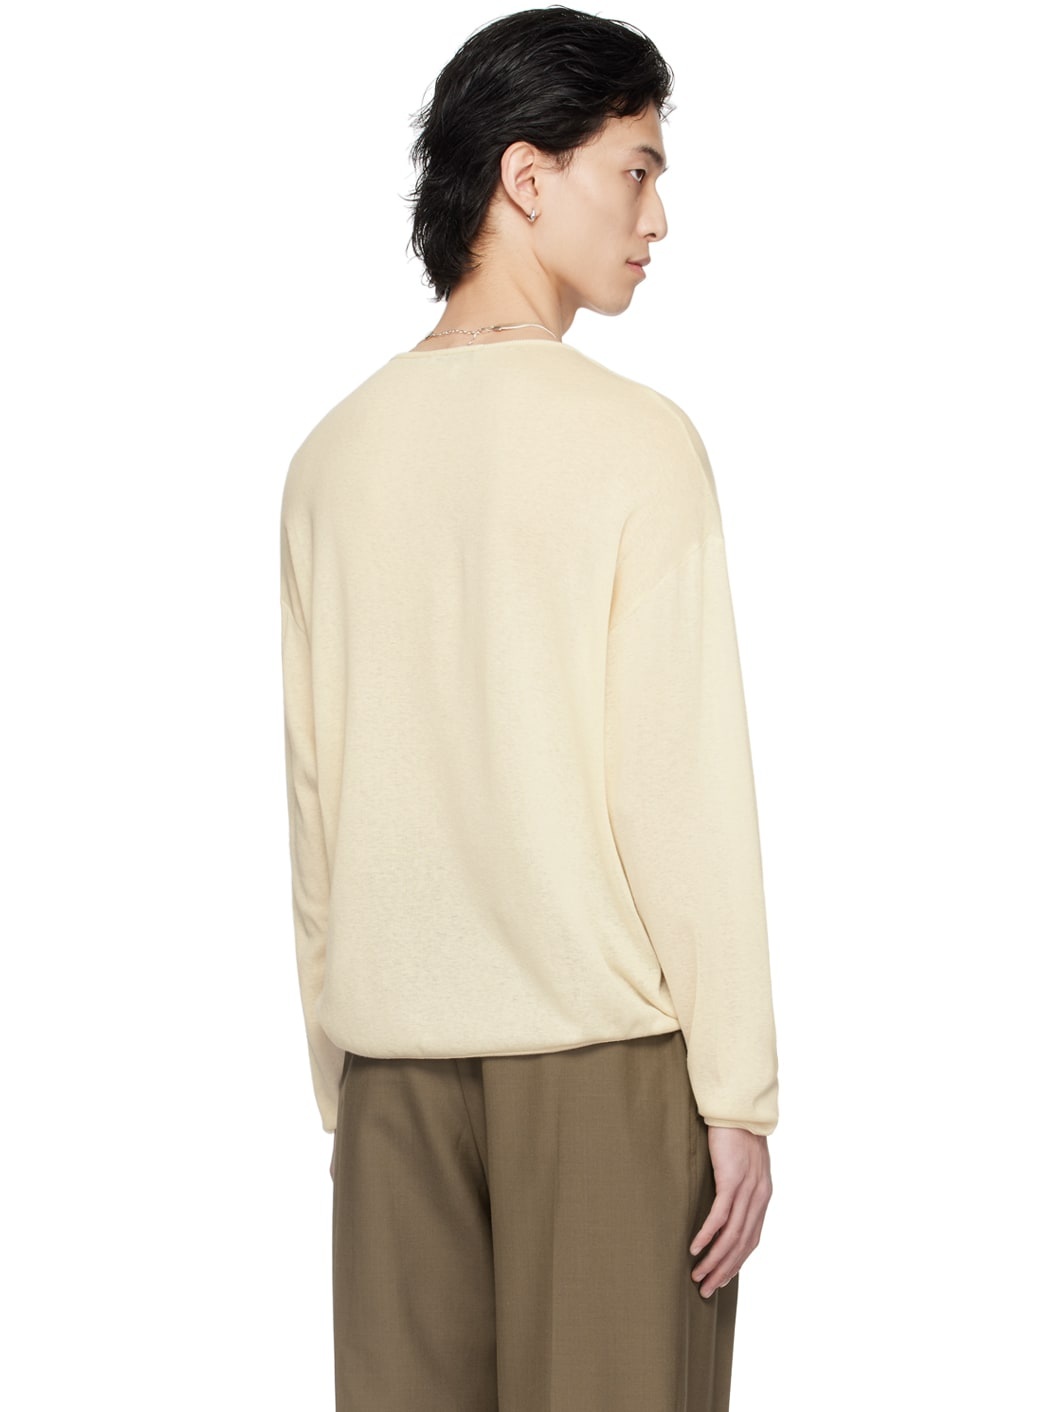 Off-White Scoop Neck Long Sleeve T-Shirt - 3